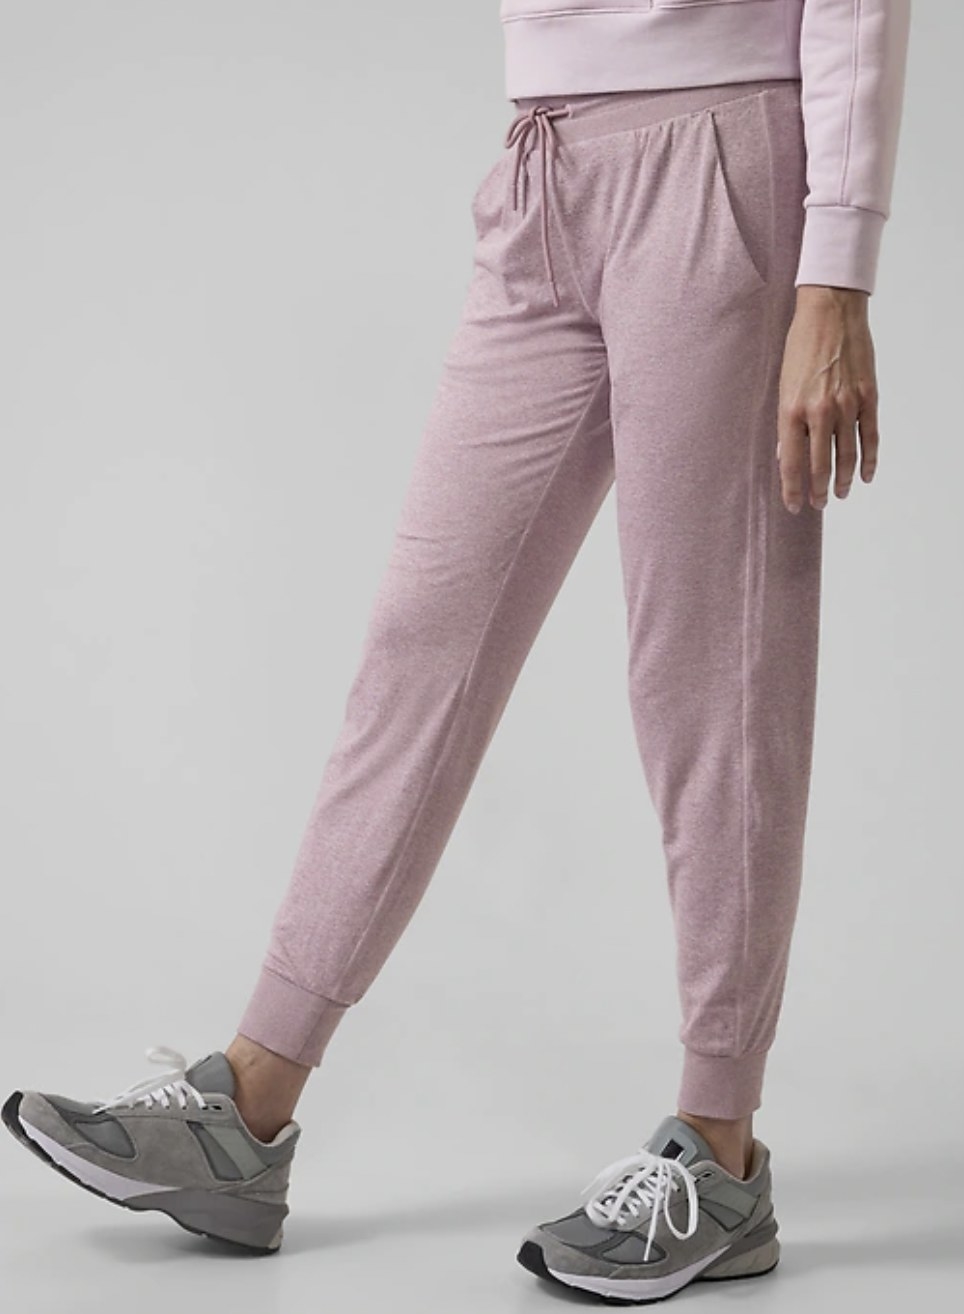 The pink joggers